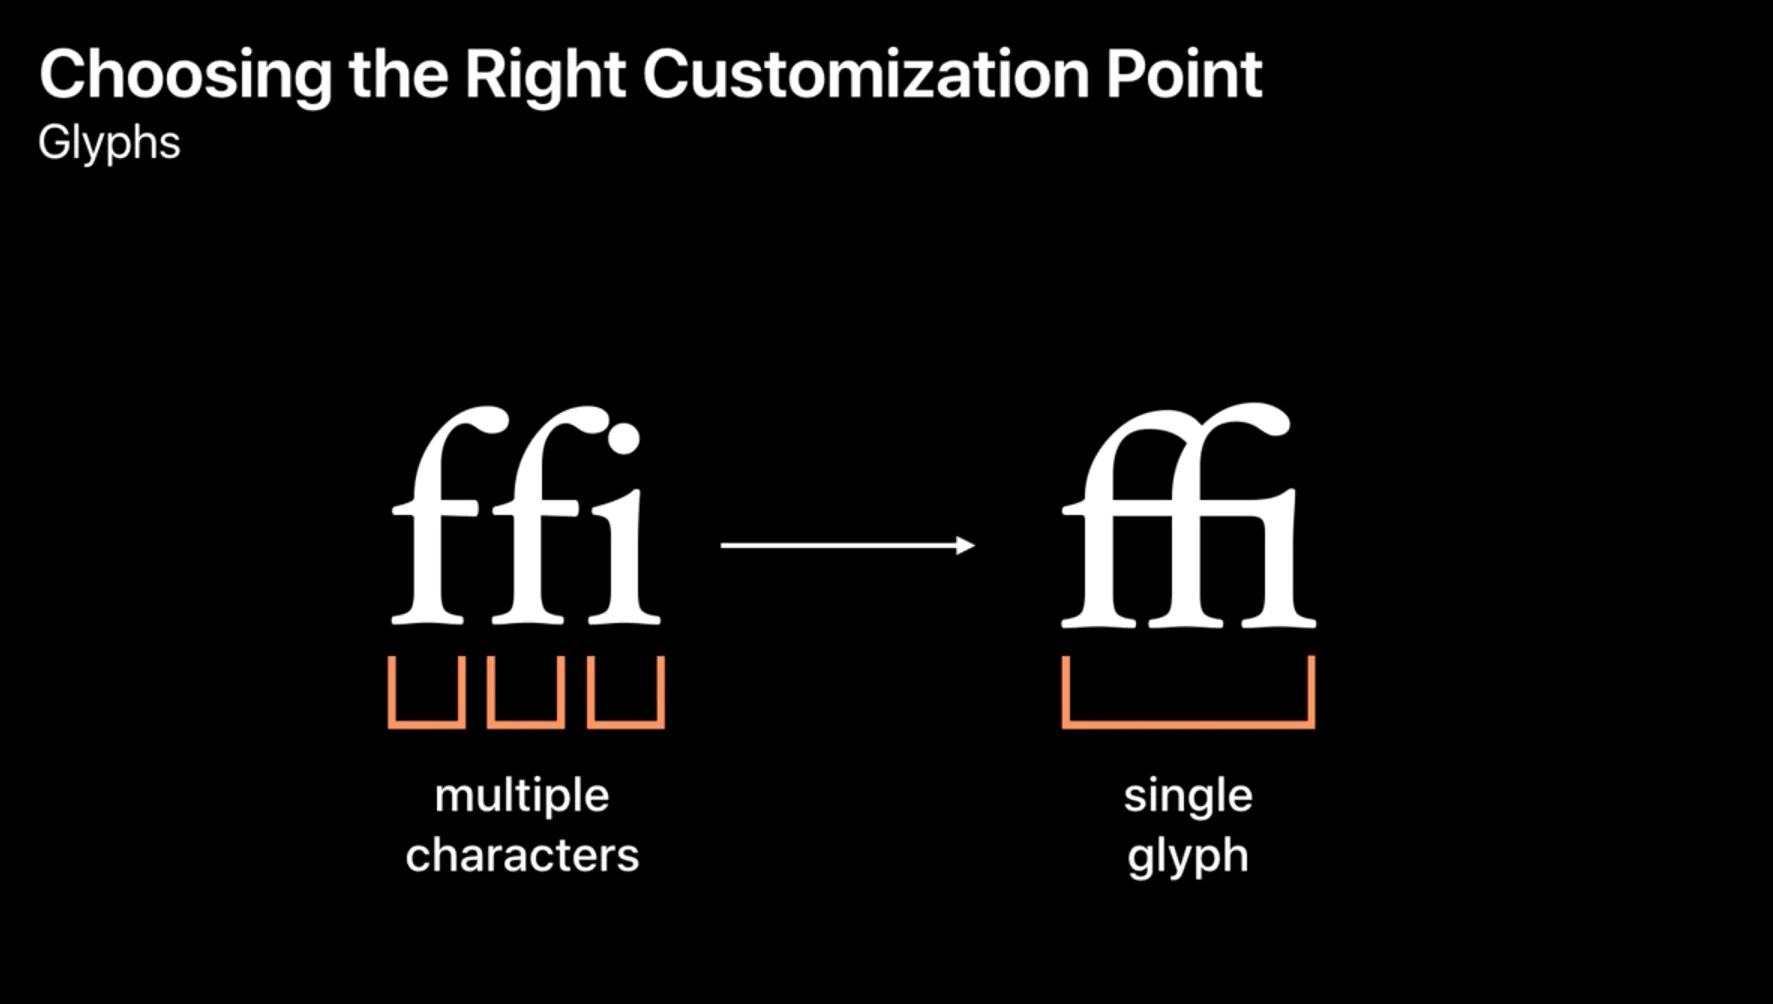 slide of session 221 explaining the difference between characters and glyphs